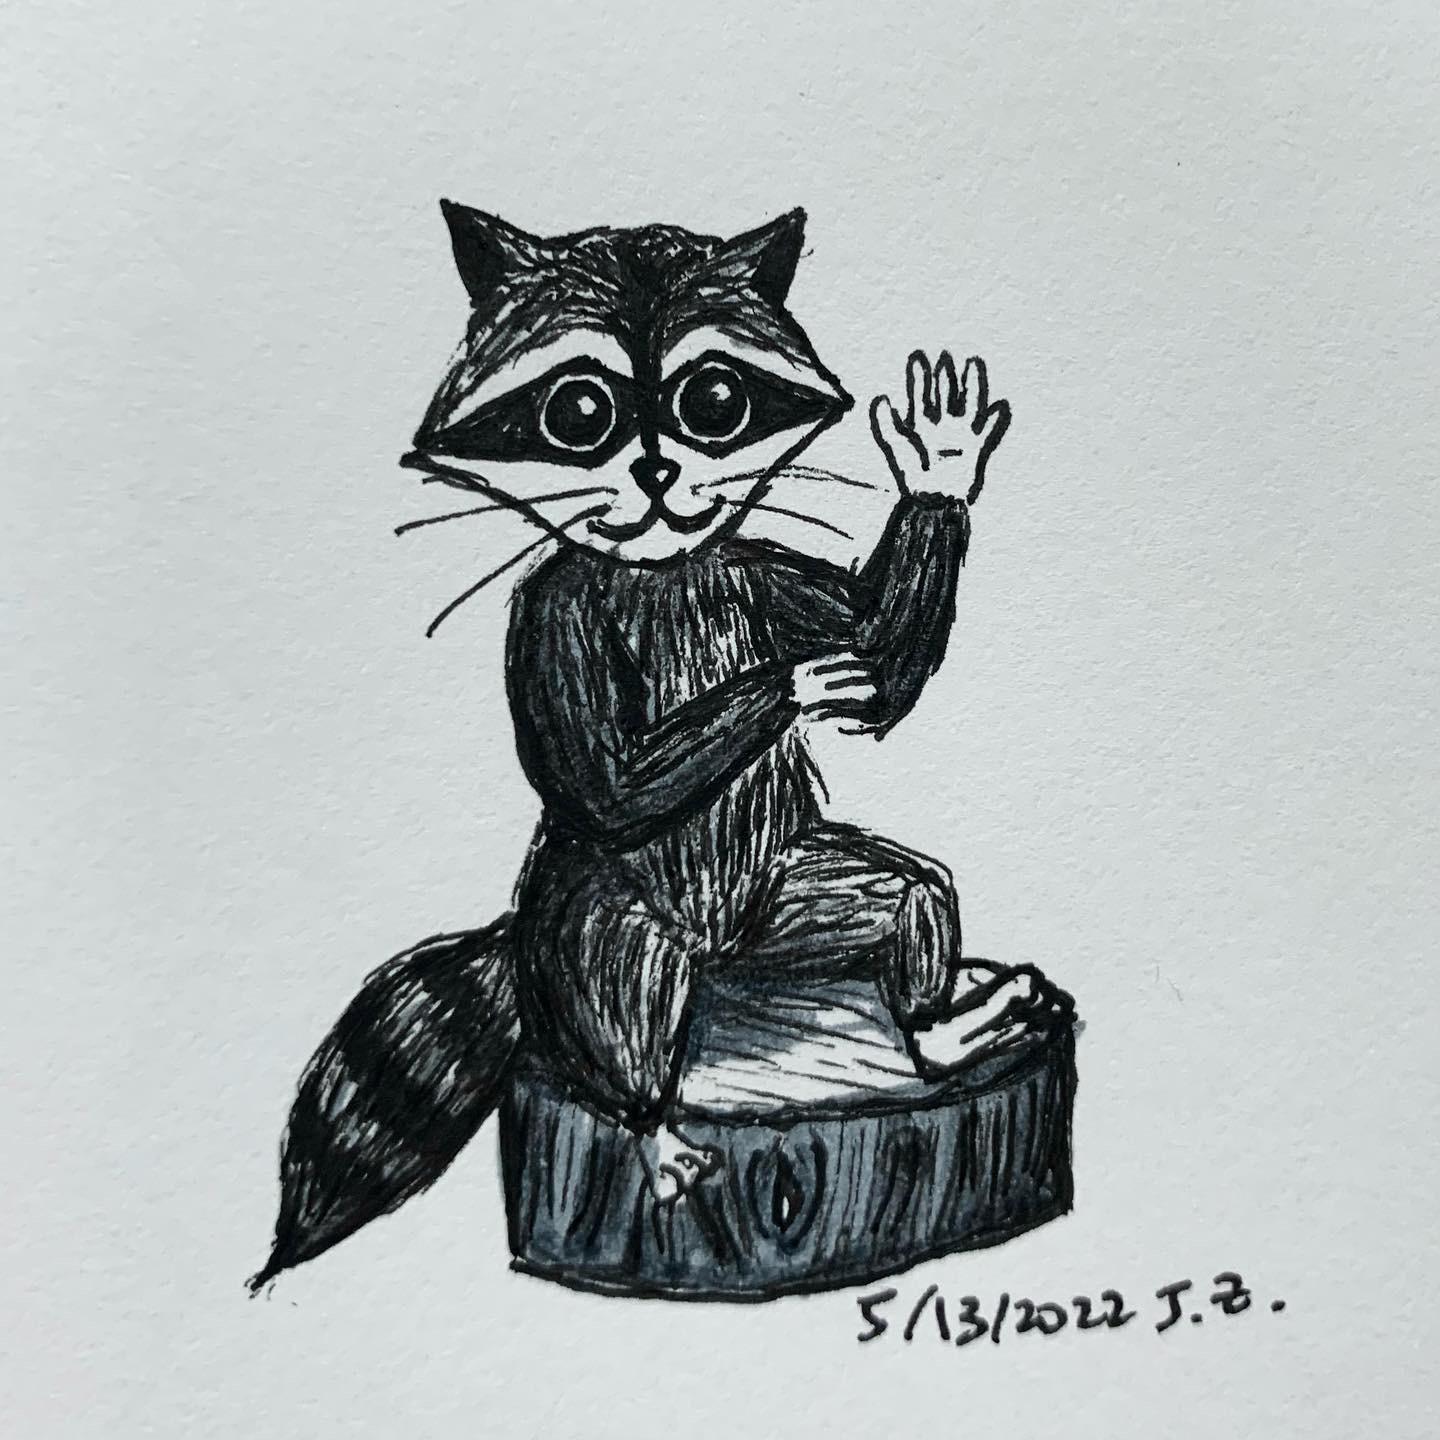 Child raccoon sits on a tree stump 5/13/2022 Sketchdaily